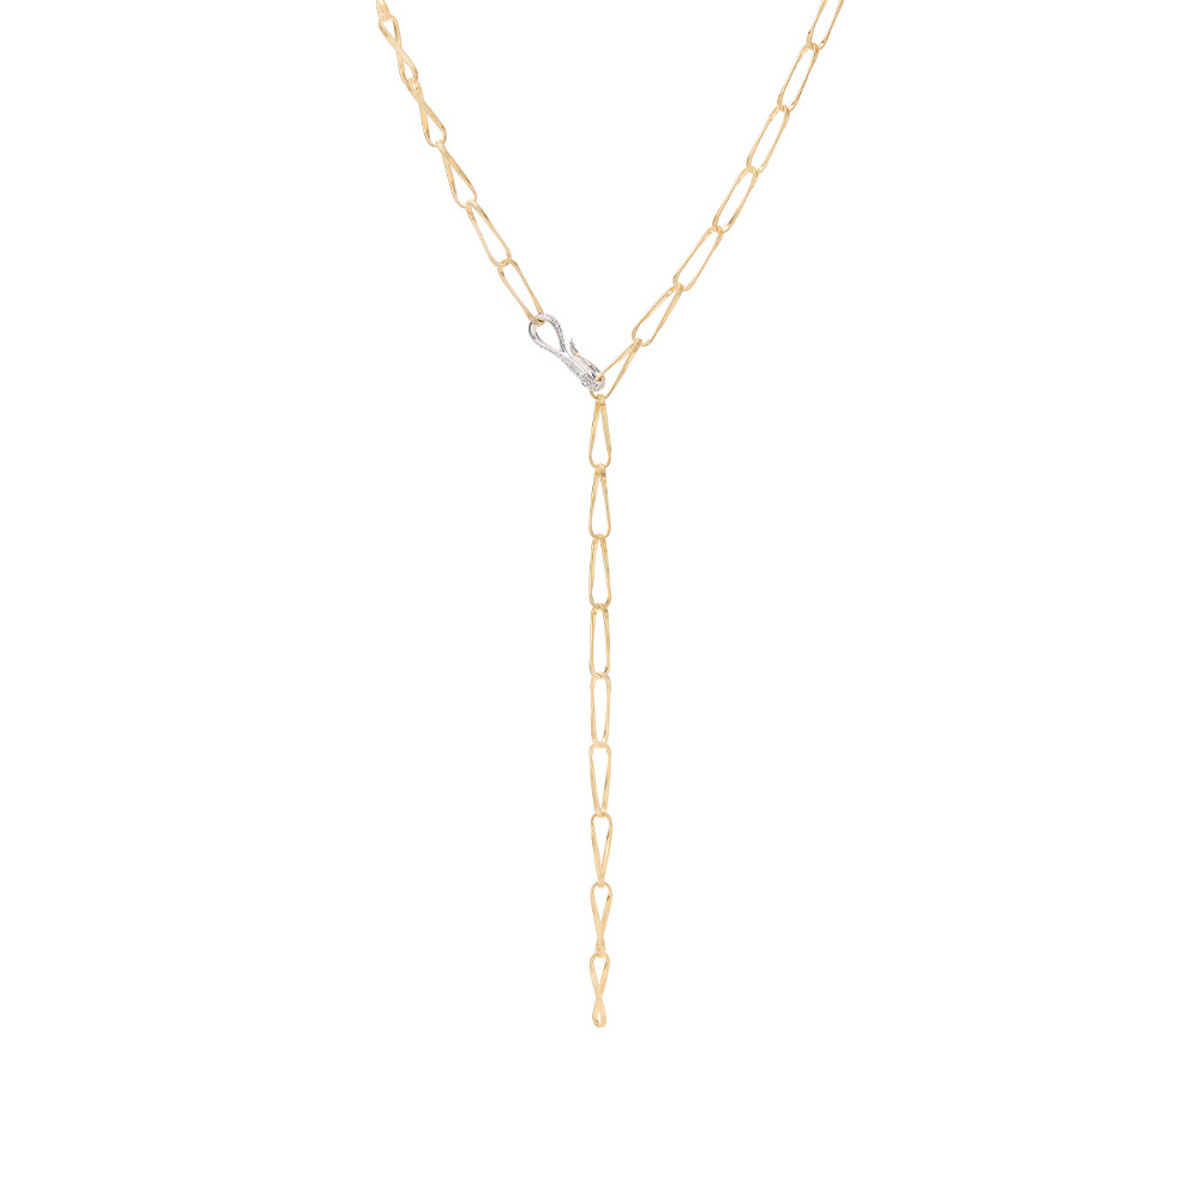 Marco Bicego Marrakech Collection 18K Yellow Gold  Large Onde Necklace-54413